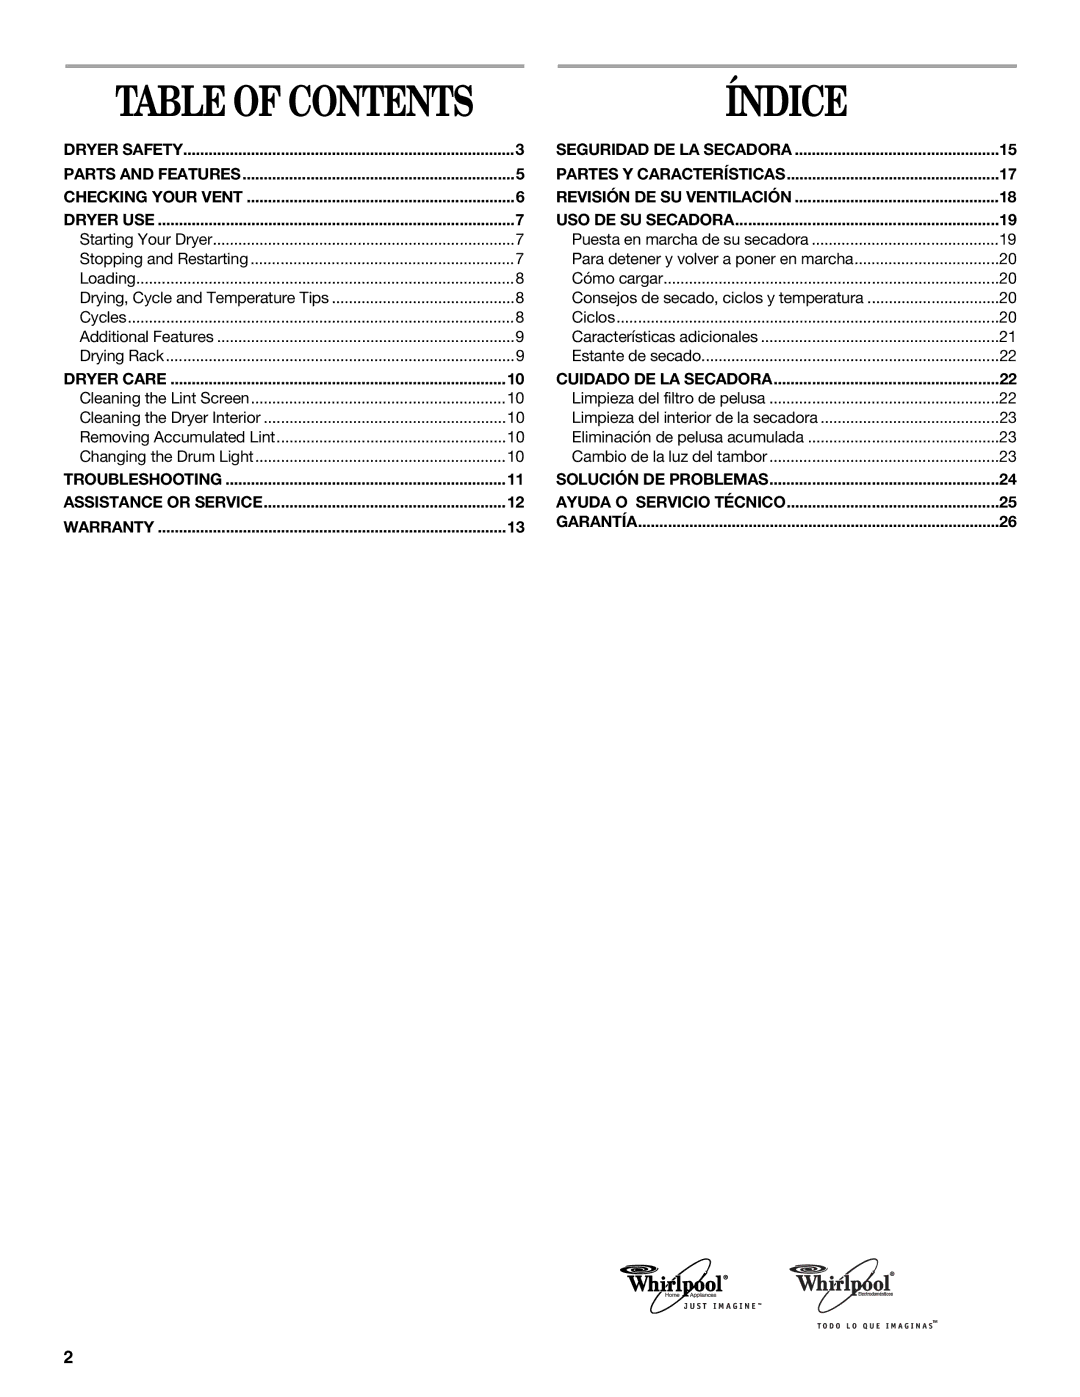 Whirlpool GEQ8821KQ0 manual Table of Contents 